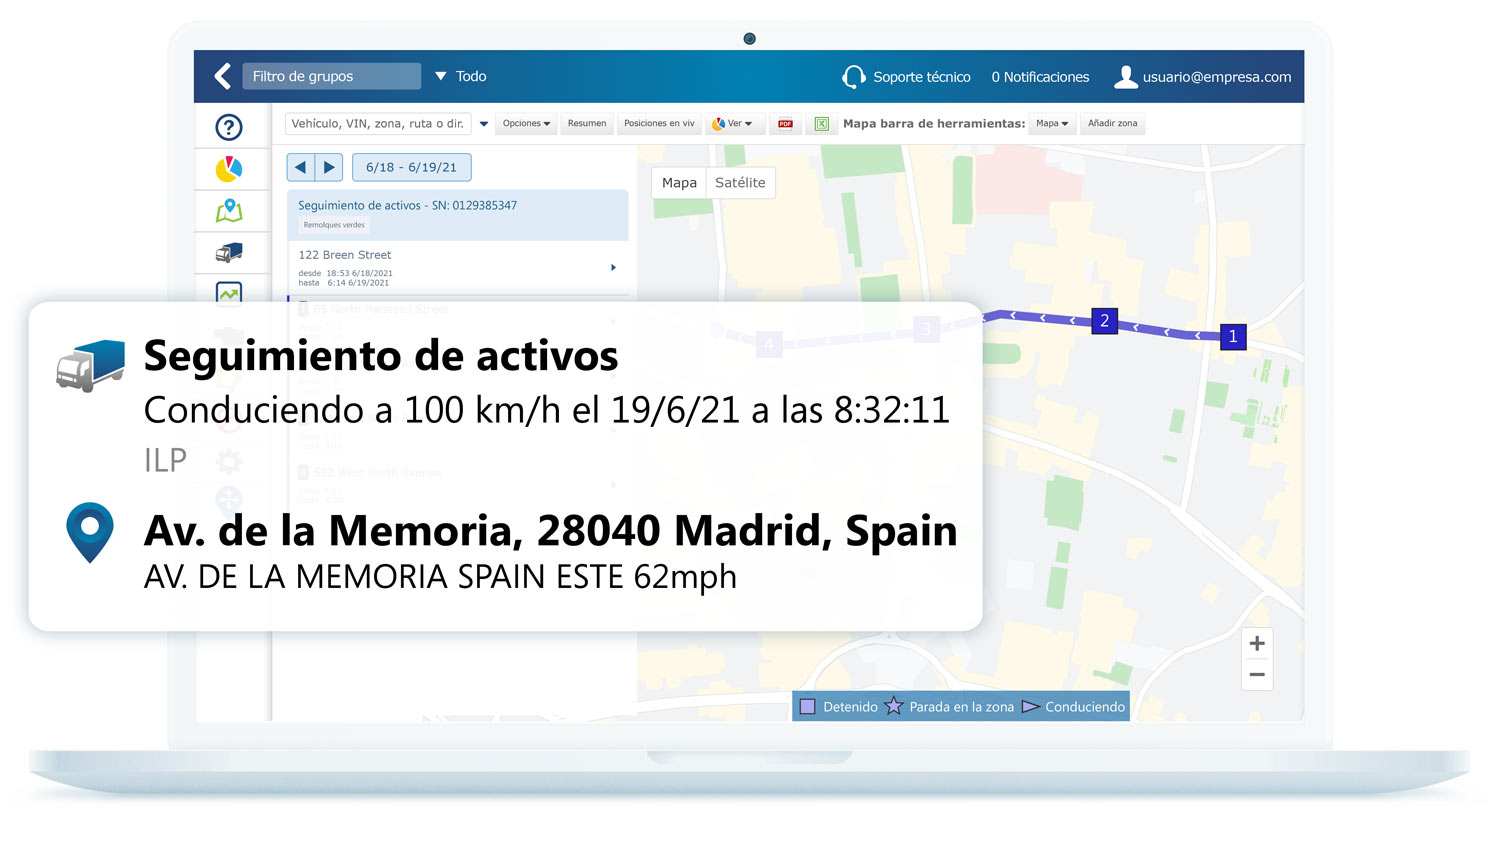 Real-time fleet tracking and monitoring